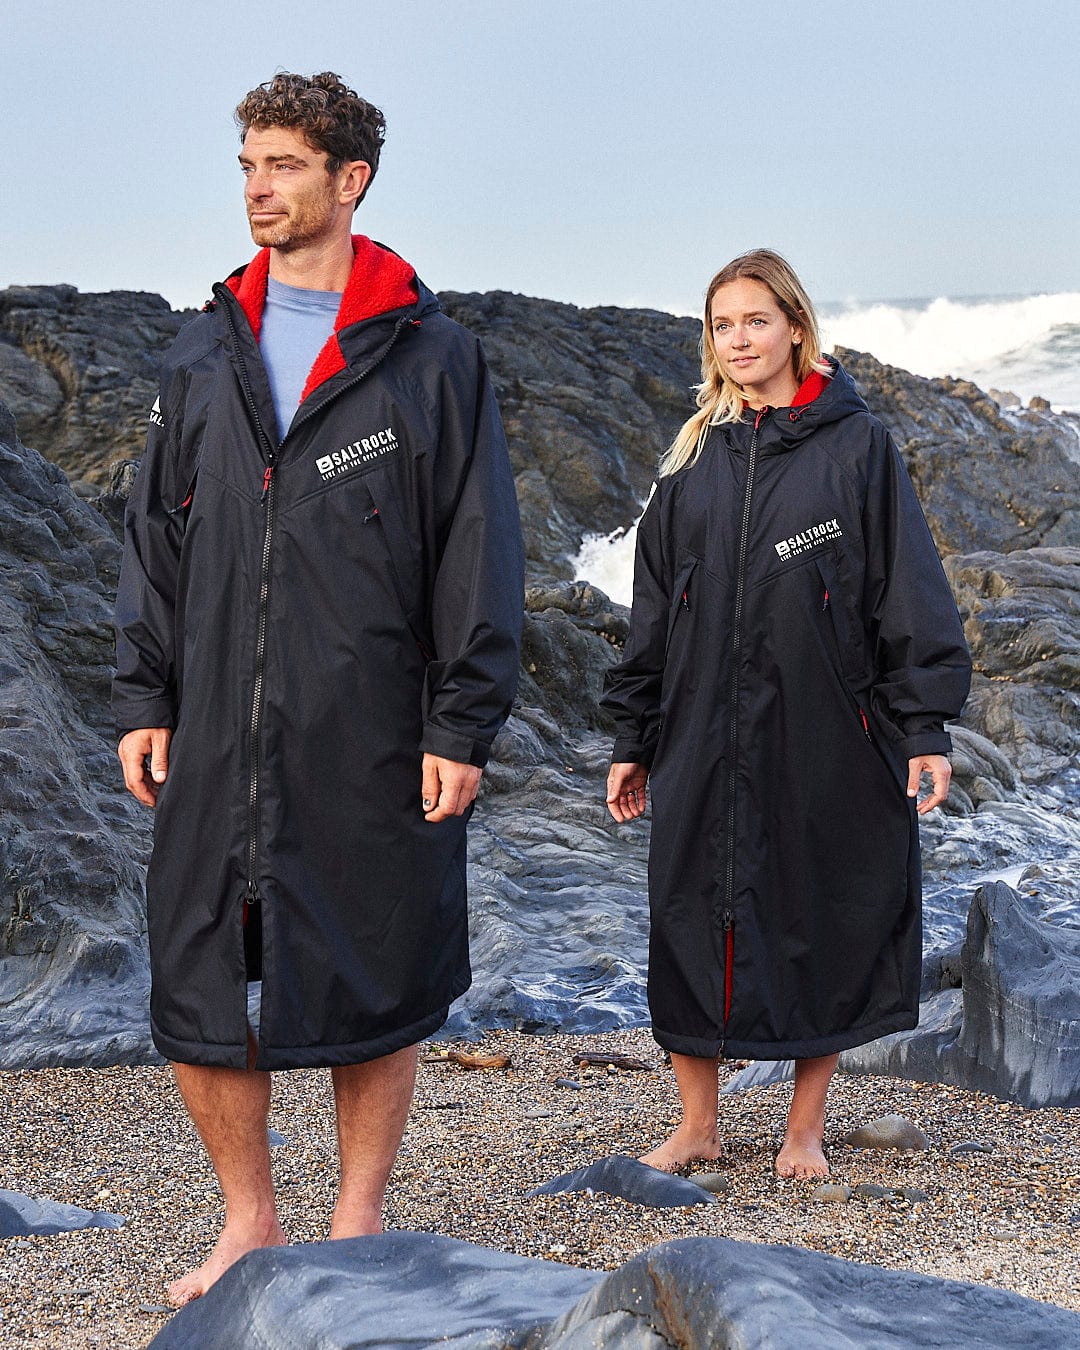 A man and a woman wearing Saltrock's Recycled Four Seasons Changing Robe in Black/Red with red microfibre fleece linings standing on a rocky beach.